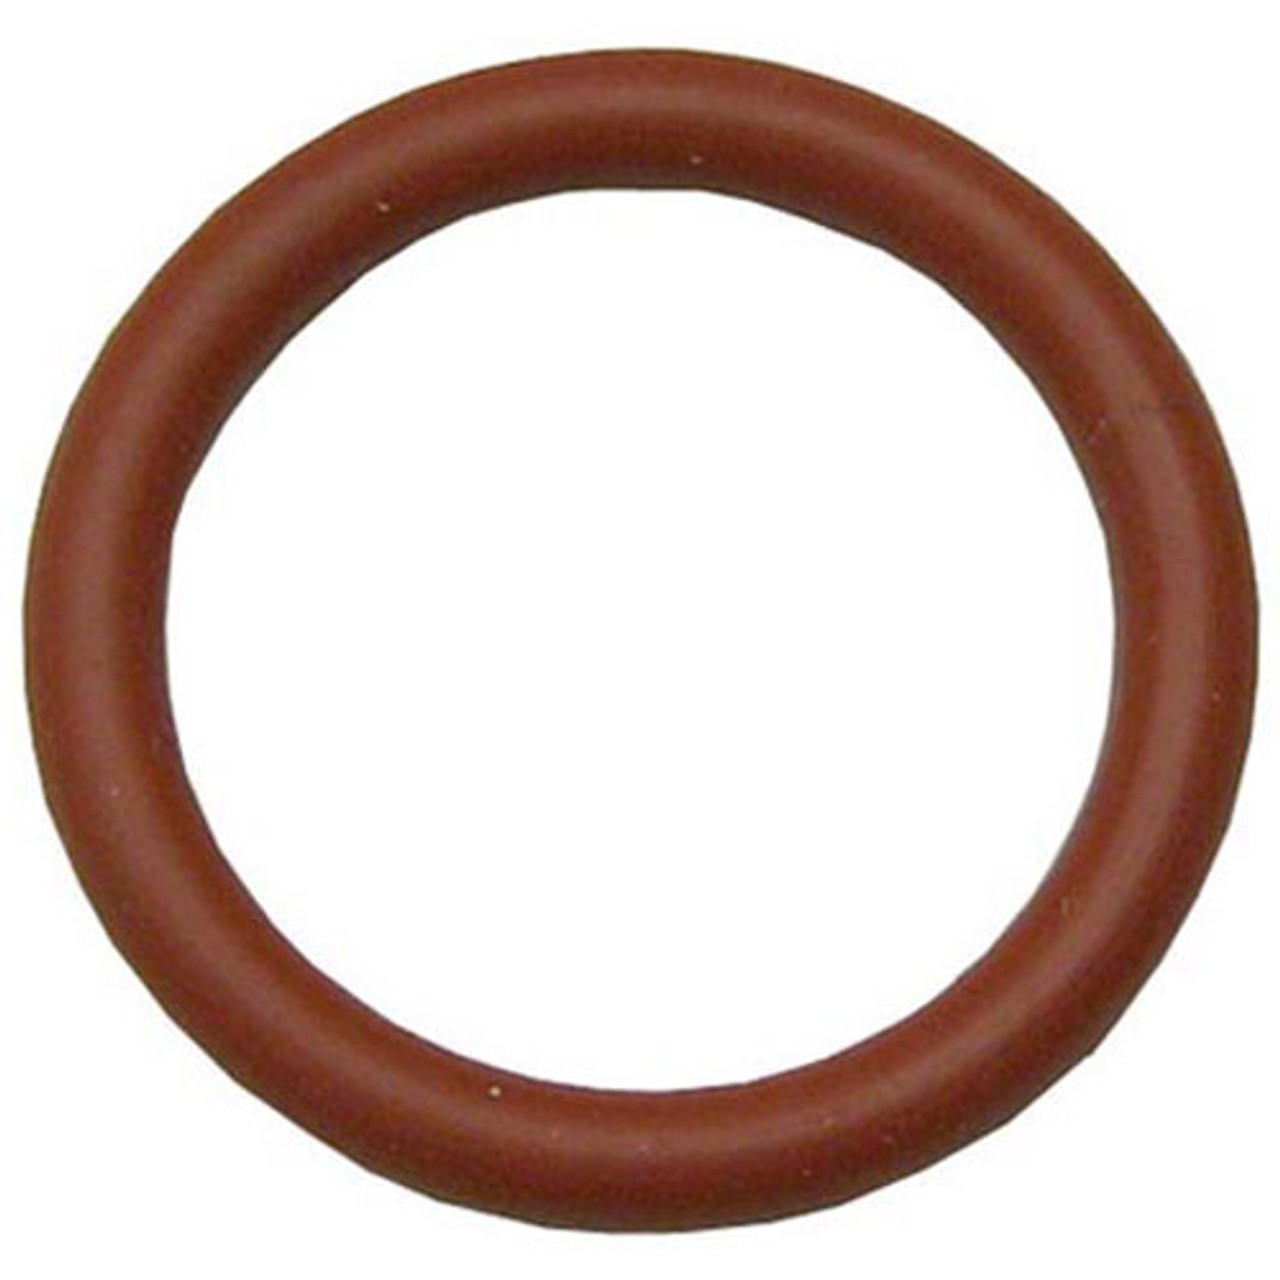 O-Ring 7/32" Id X 1/16" Width - Replacement Part For AllPoints 321544